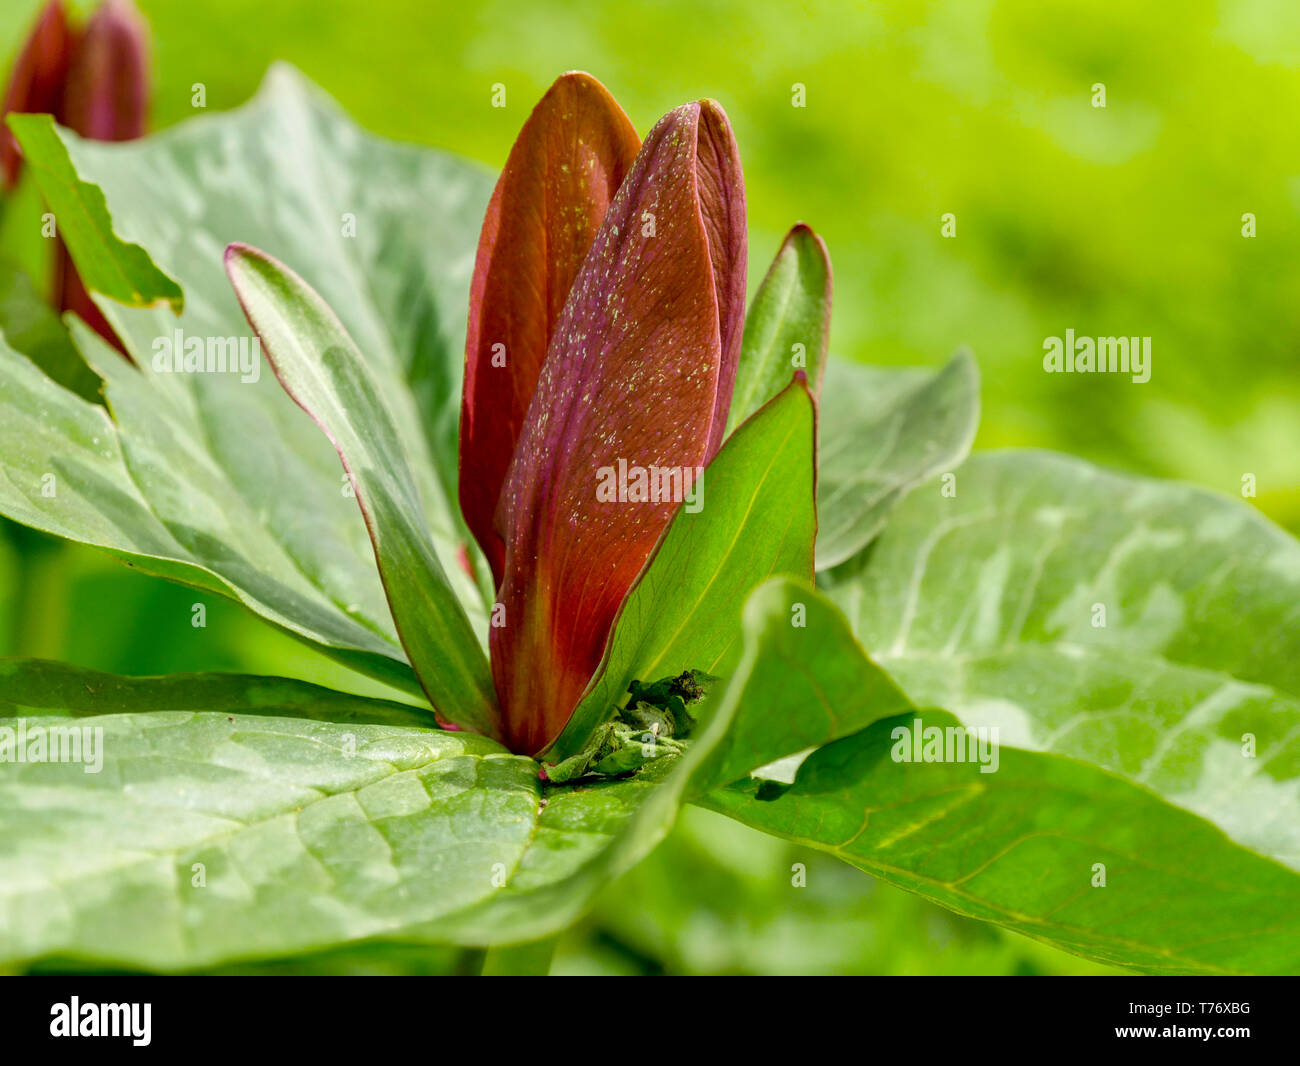 Toadshade or wake robin (Trillium sessile). Flowers smell like rotting meat and are fly pollinated. Stock Photo